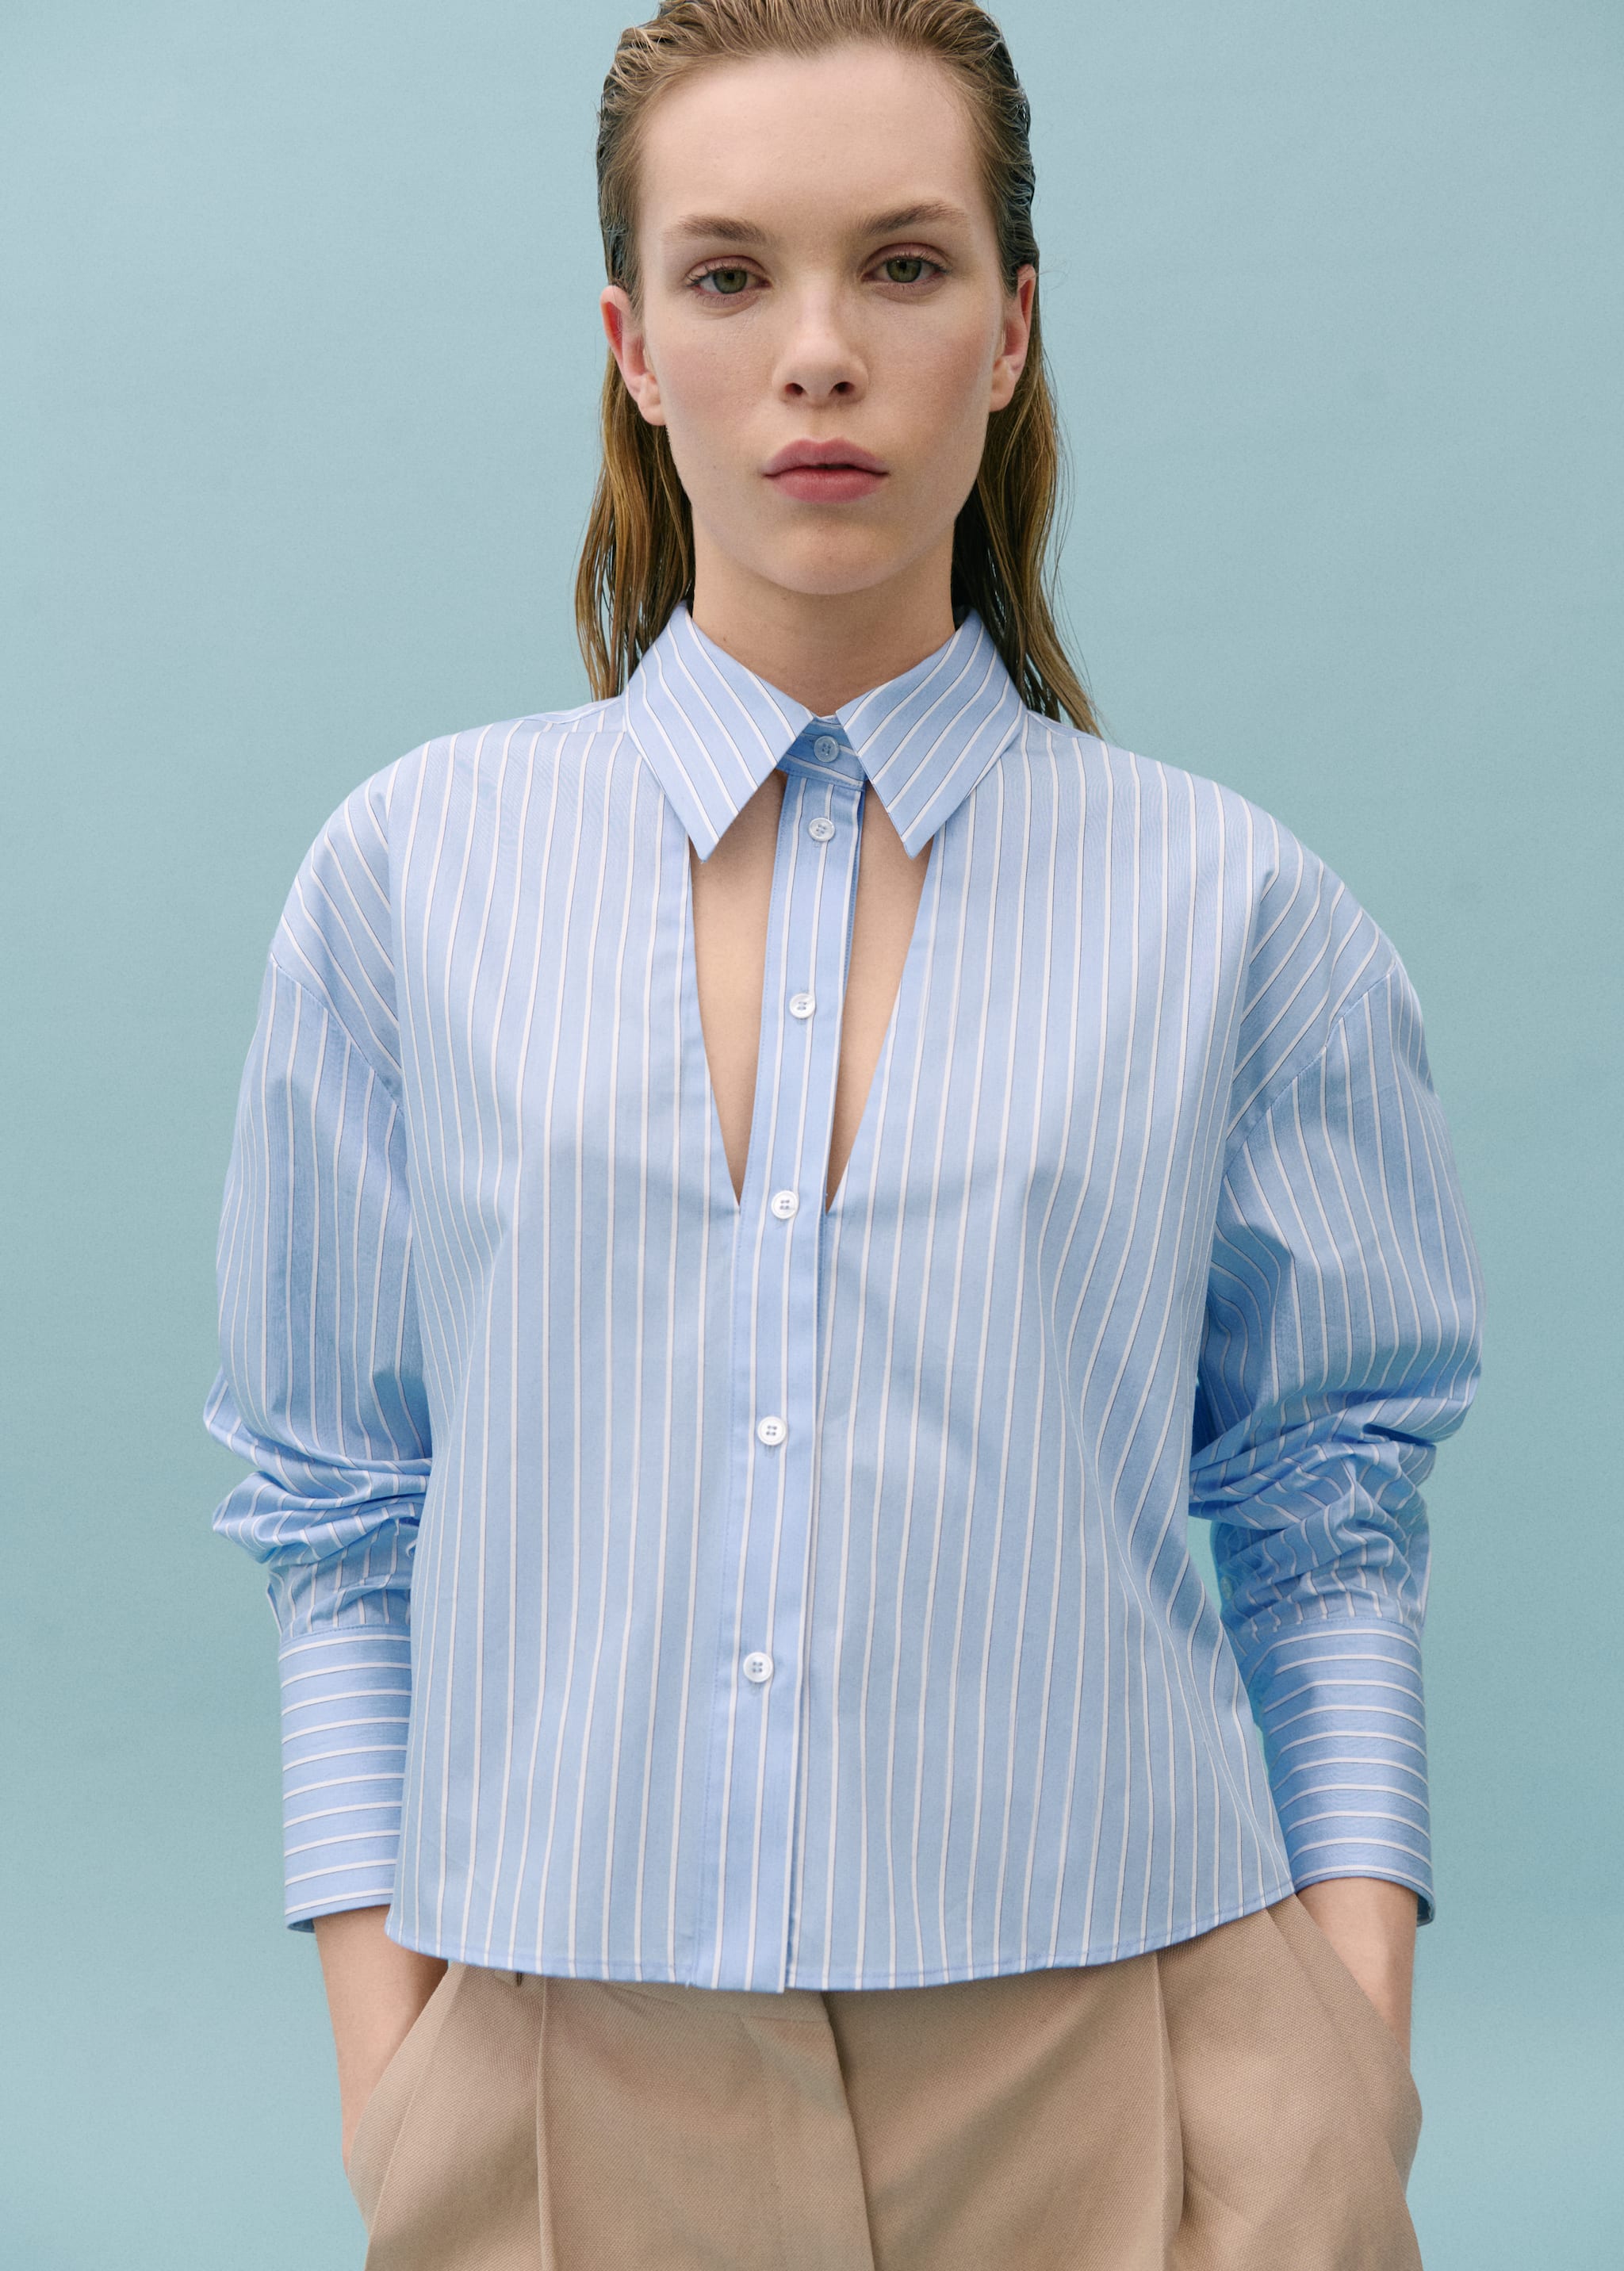 Striped shirt with cut-out - Medium plane